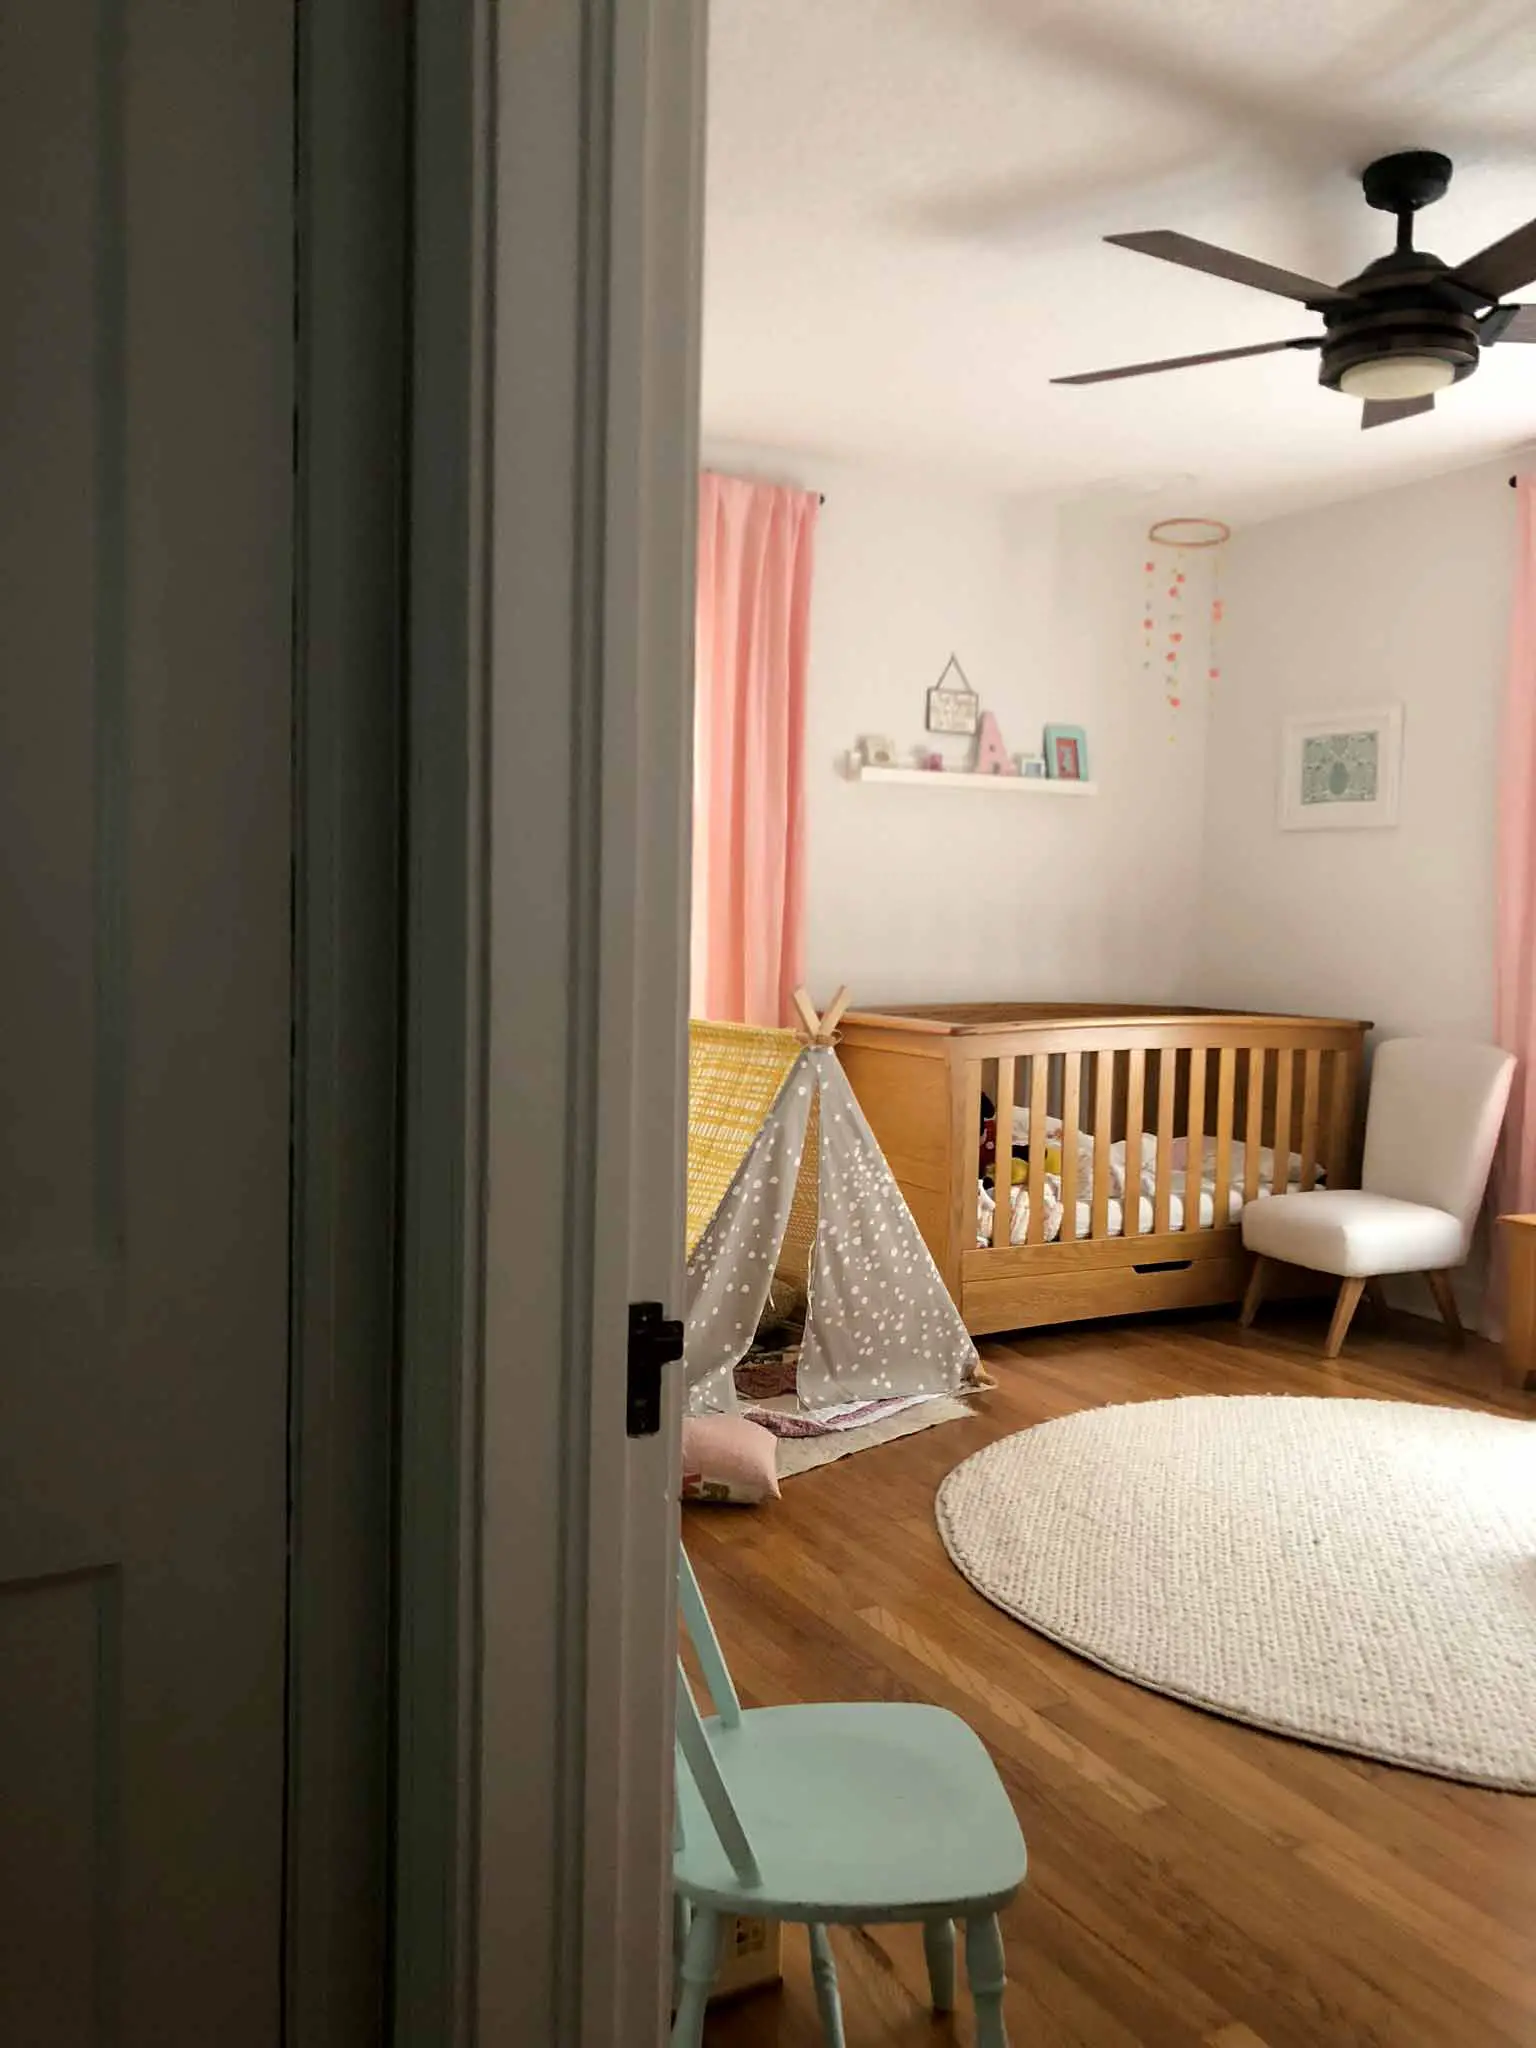 A Bedroom Update for Two Little Girls: One Room Challenge Week One!